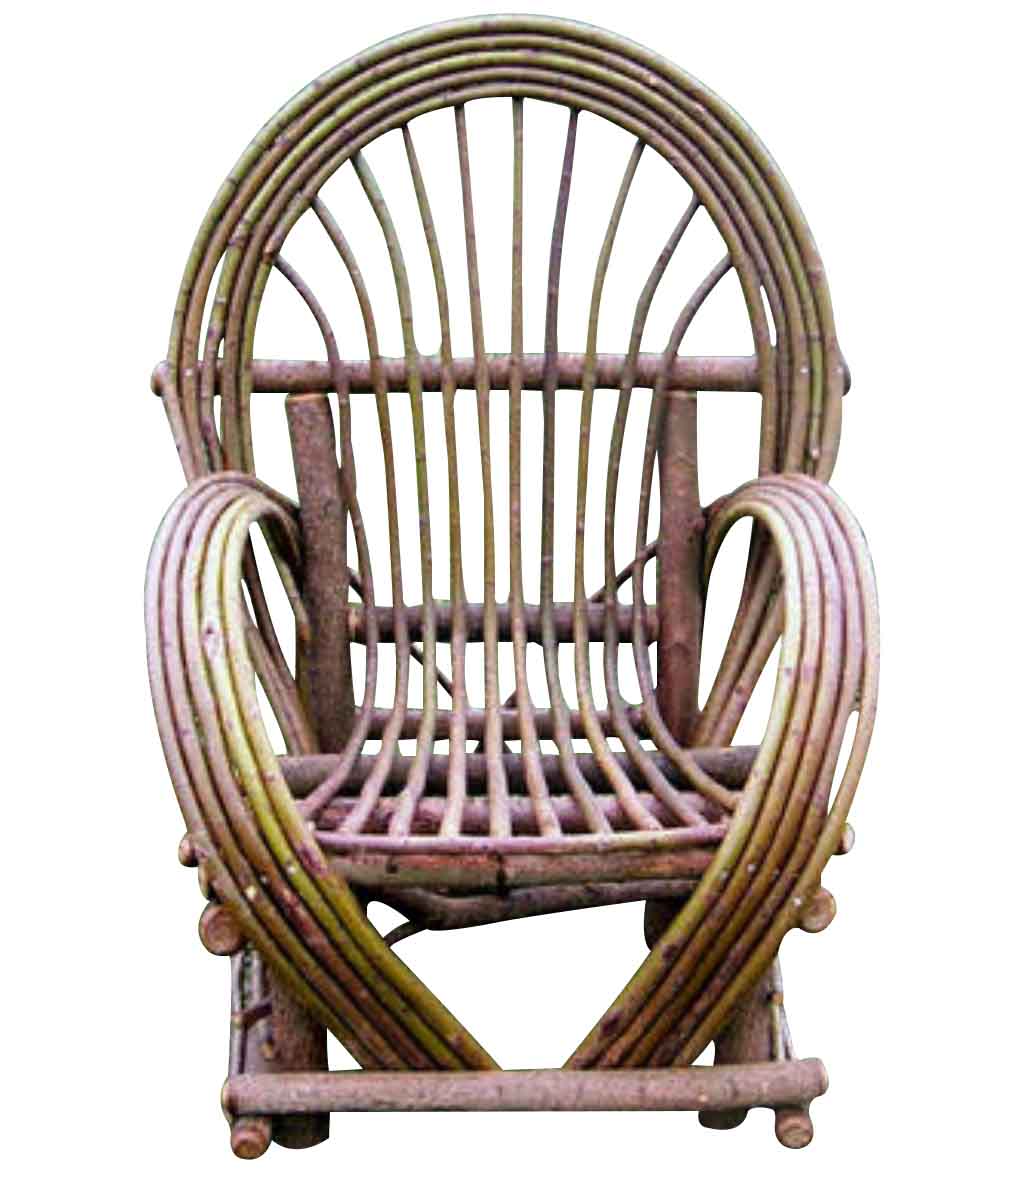 Willow Arm Chair Rustic Artistry